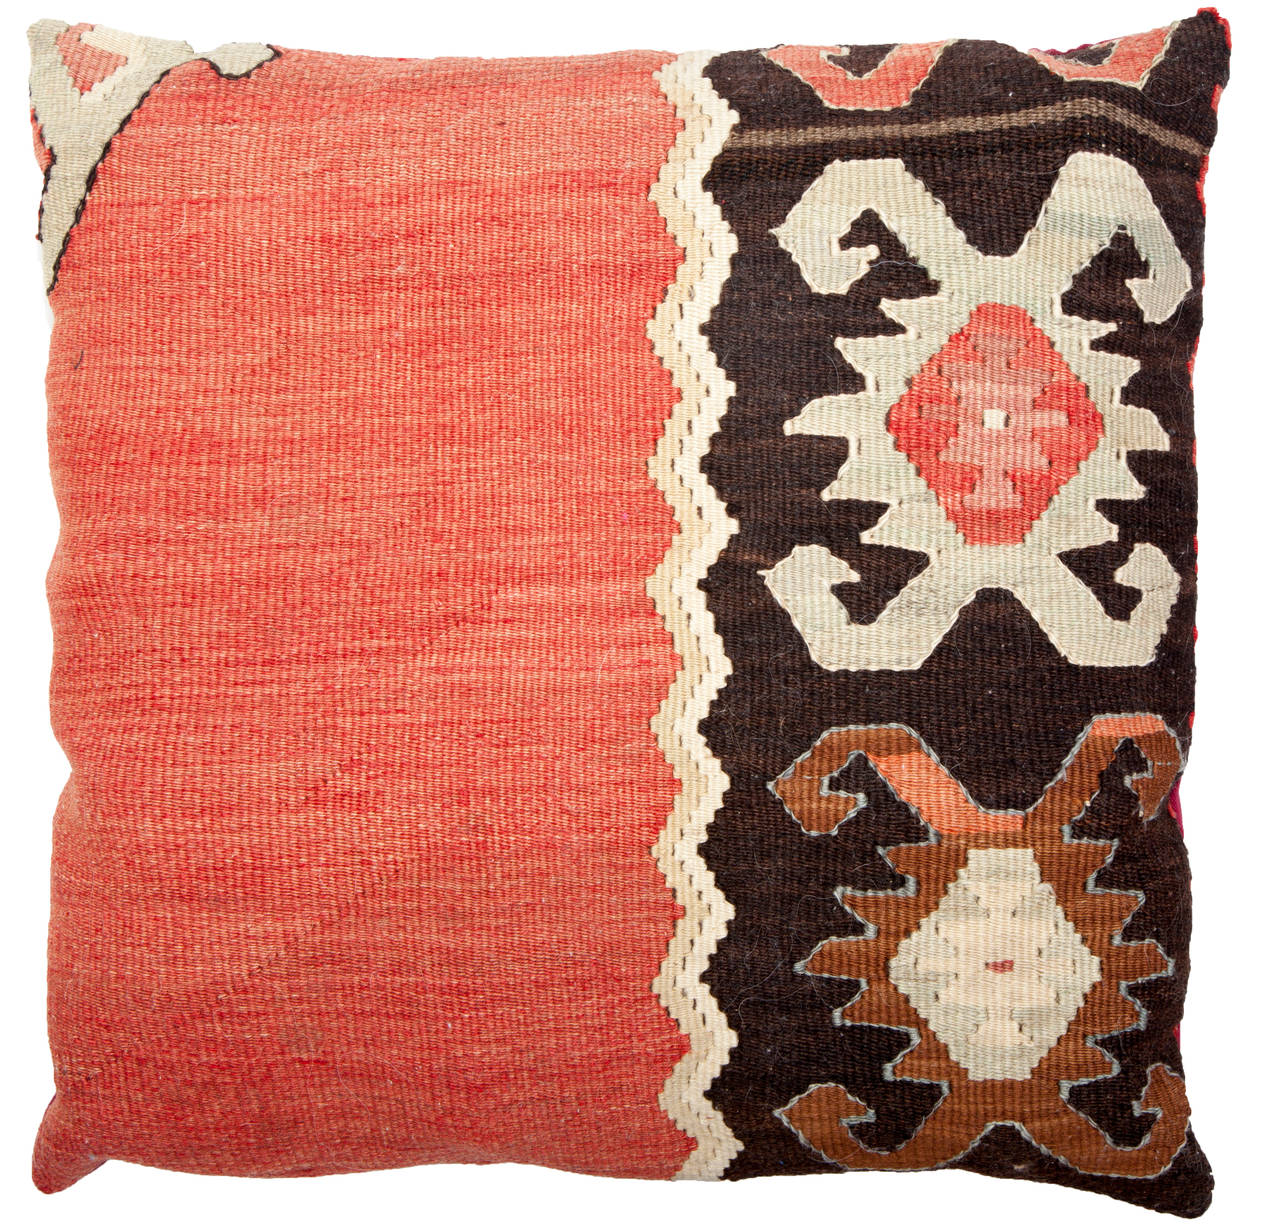 Kilim Rugs Made into Turkish Pillows, Three-Piece Set In Good Condition For Sale In Asheville, NC